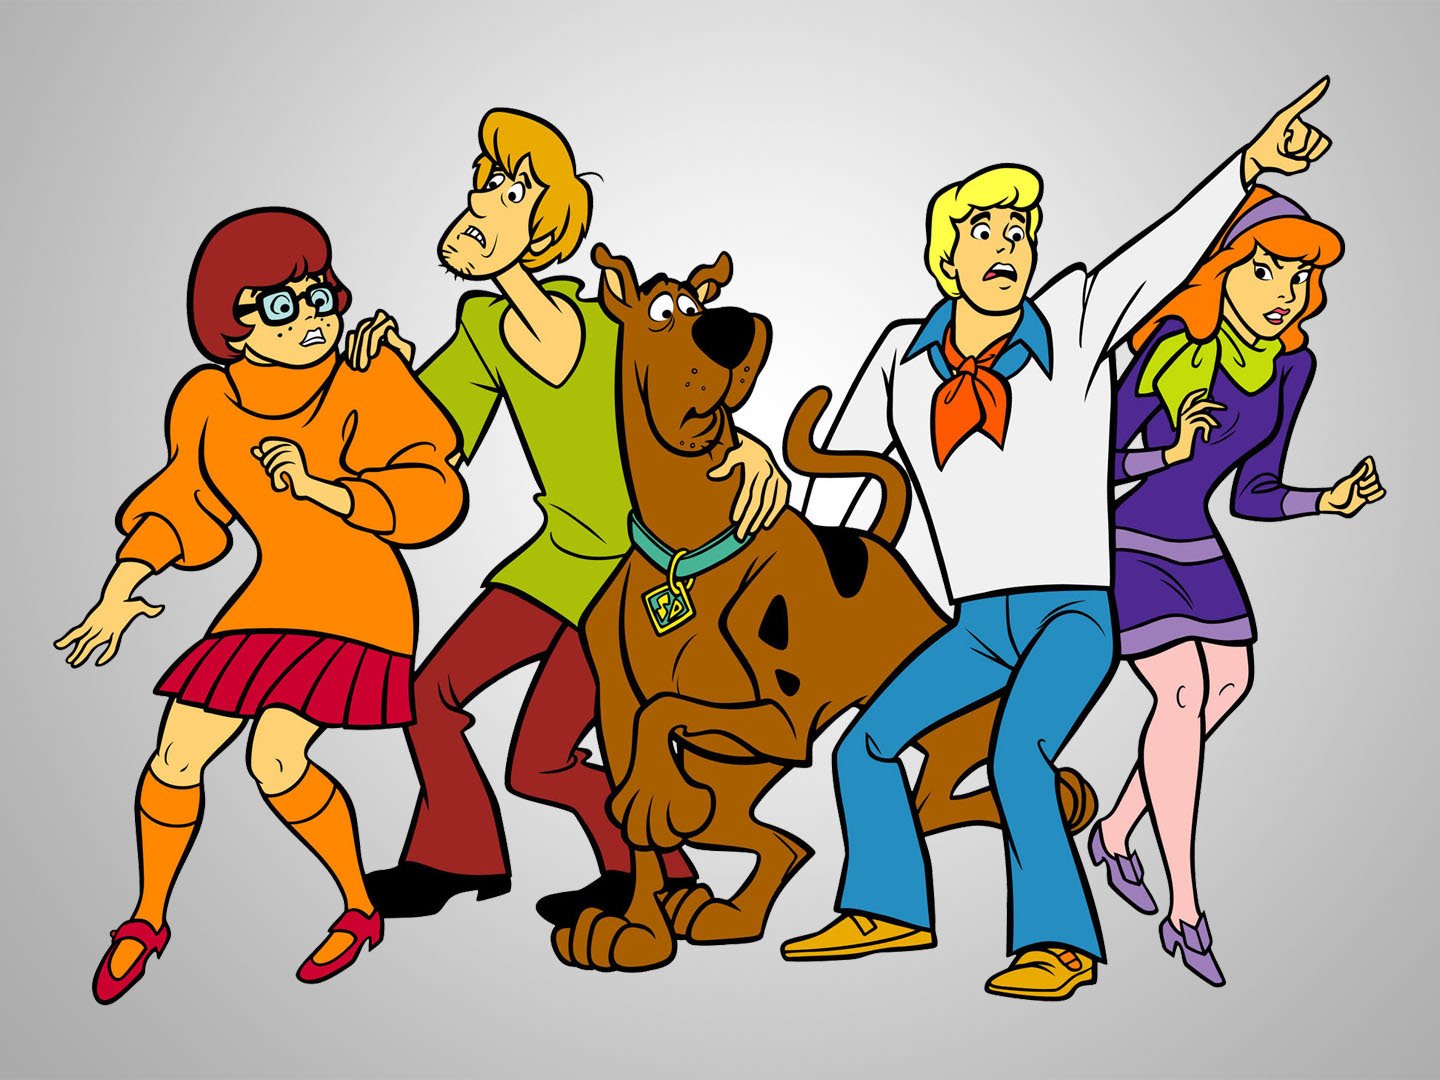 A drawing of the "Scooby-Doo" animation characters | Photo: Pixy.org/CC BY-NC-ND 4.0